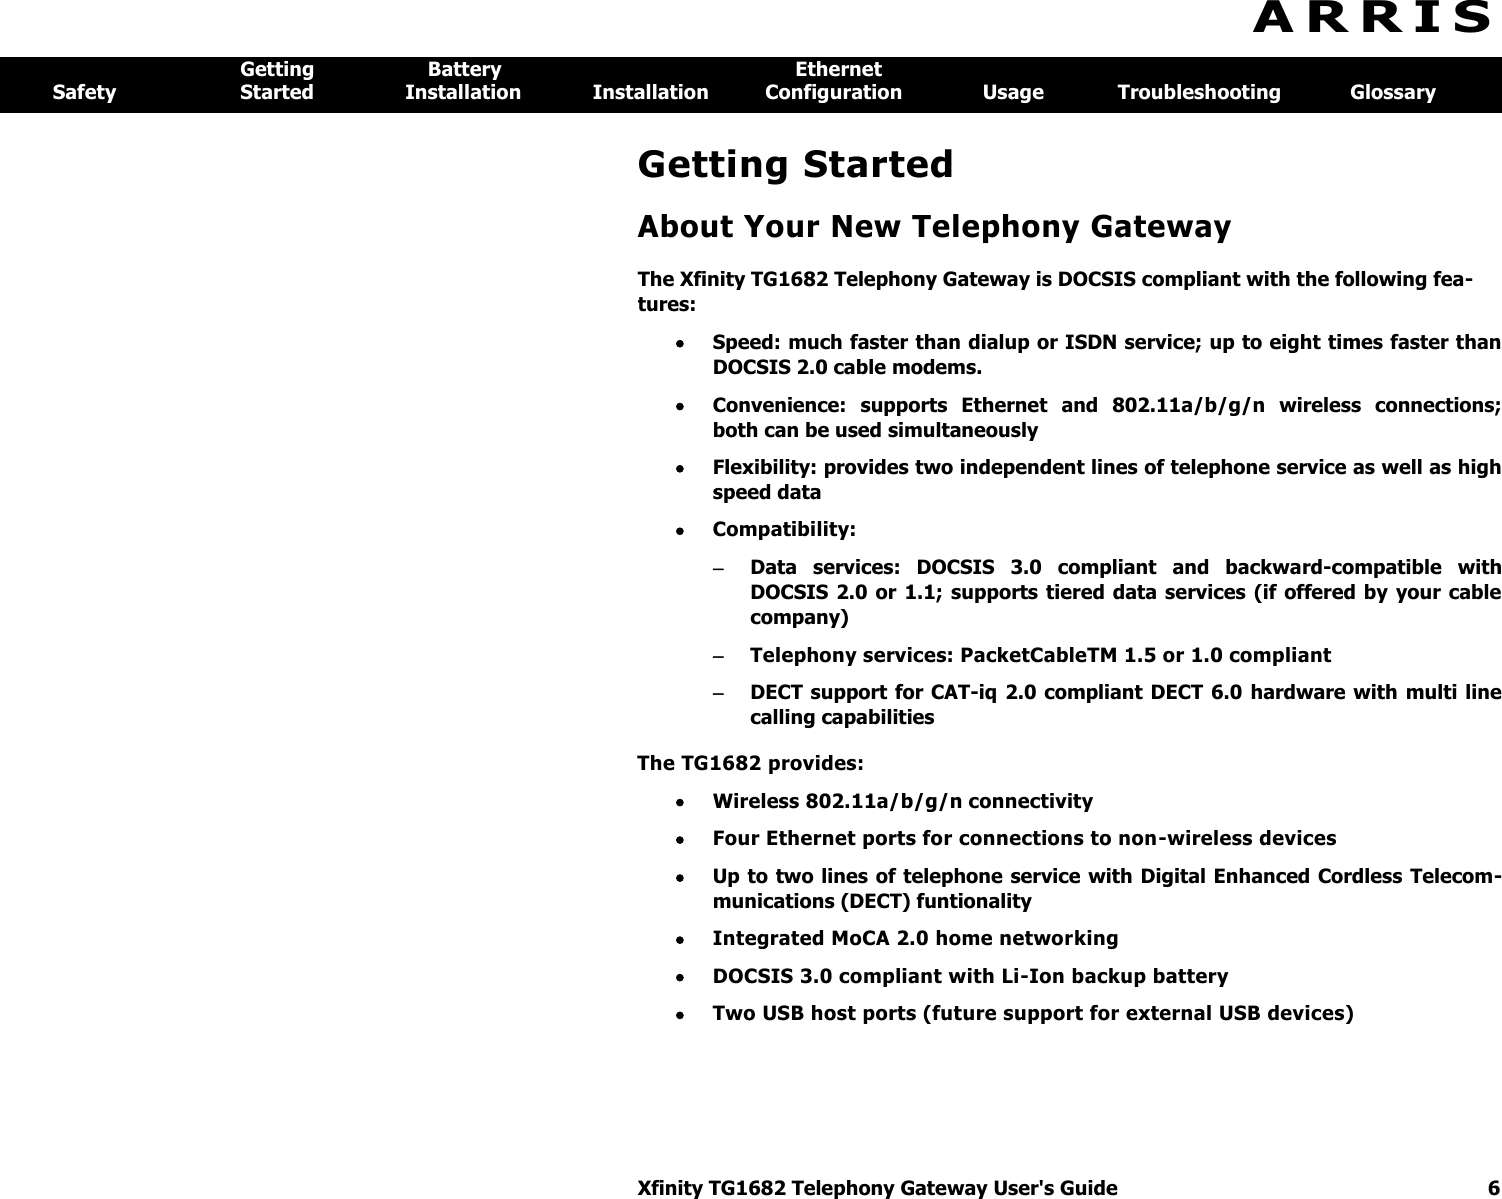 Xfinity TG1682 Telephony Gateway User&apos;s Guide  6  A R R I S  Getting  Battery  Ethernet Safety  Started  Installation  Installation  Configuration  Usage  Troubleshooting  Glossary Getting Started About Your New Telephony Gateway The Xfinity TG1682 Telephony Gateway is DOCSIS compliant with the following fea-tures:  Speed: much faster than dialup or ISDN service; up to eight times faster than DOCSIS 2.0 cable modems.  Convenience:  supports  Ethernet  and  802.11a/b/g/n  wireless  connections; both can be used simultaneously  Flexibility: provides two independent lines of telephone service as well as high speed data  Compatibility:  Data  services:  DOCSIS  3.0  compliant  and  backward-compatible  with DOCSIS 2.0 or 1.1; supports tiered data services  (if offered by  your cable company)  Telephony services: PacketCableTM 1.5 or 1.0 compliant  DECT support for CAT-iq 2.0 compliant DECT 6.0 hardware with  multi line calling capabilities The TG1682 provides:  Wireless 802.11a/b/g/n connectivity  Four Ethernet ports for connections to non-wireless devices  Up to two lines of telephone service with Digital Enhanced Cordless Telecom-munications (DECT) funtionality  Integrated MoCA 2.0 home networking  DOCSIS 3.0 compliant with Li-Ion backup battery  Two USB host ports (future support for external USB devices) 